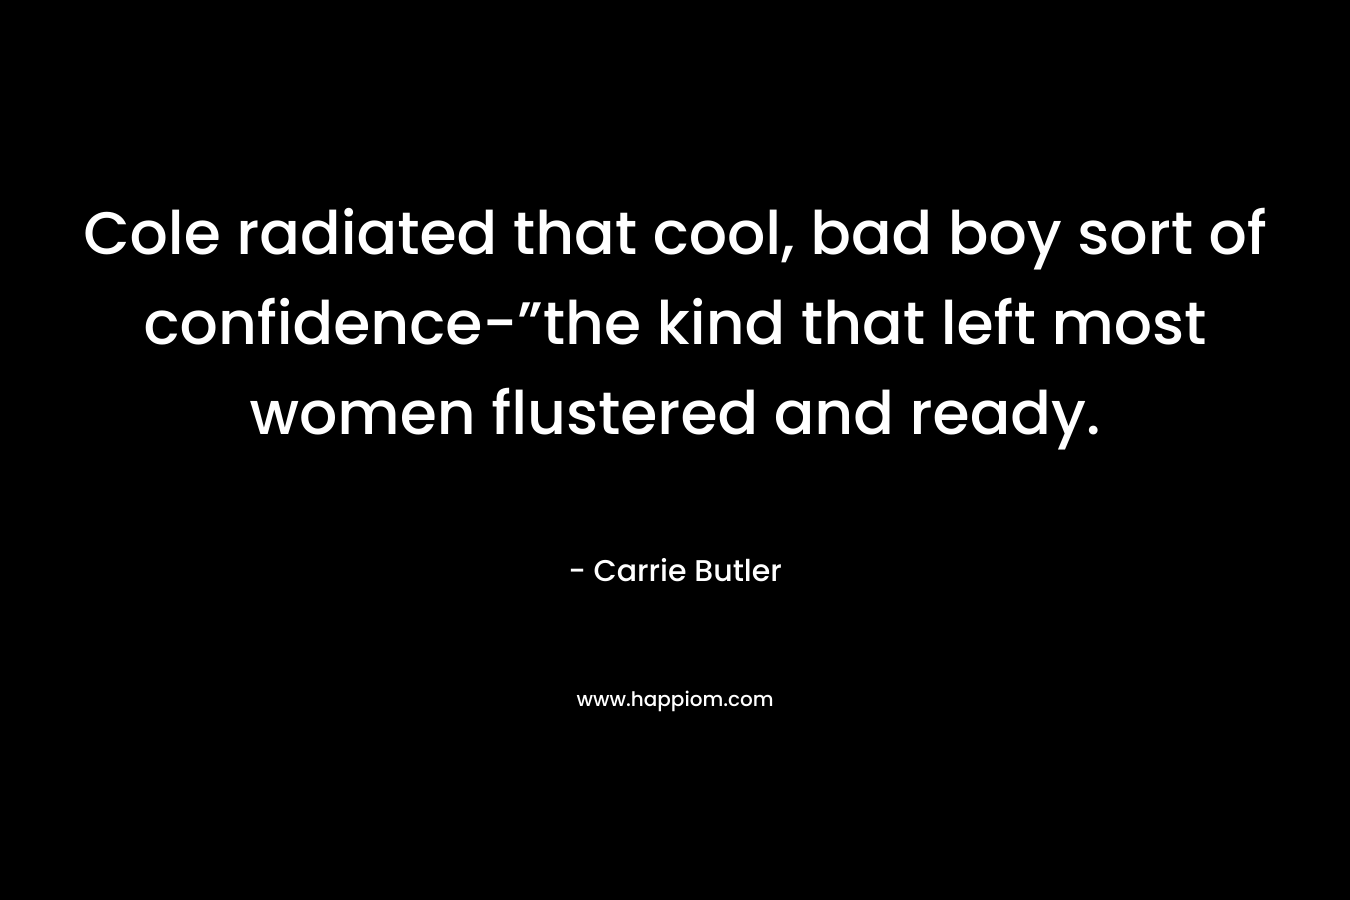 Cole radiated that cool, bad boy sort of confidence-”the kind that left most women flustered and ready.